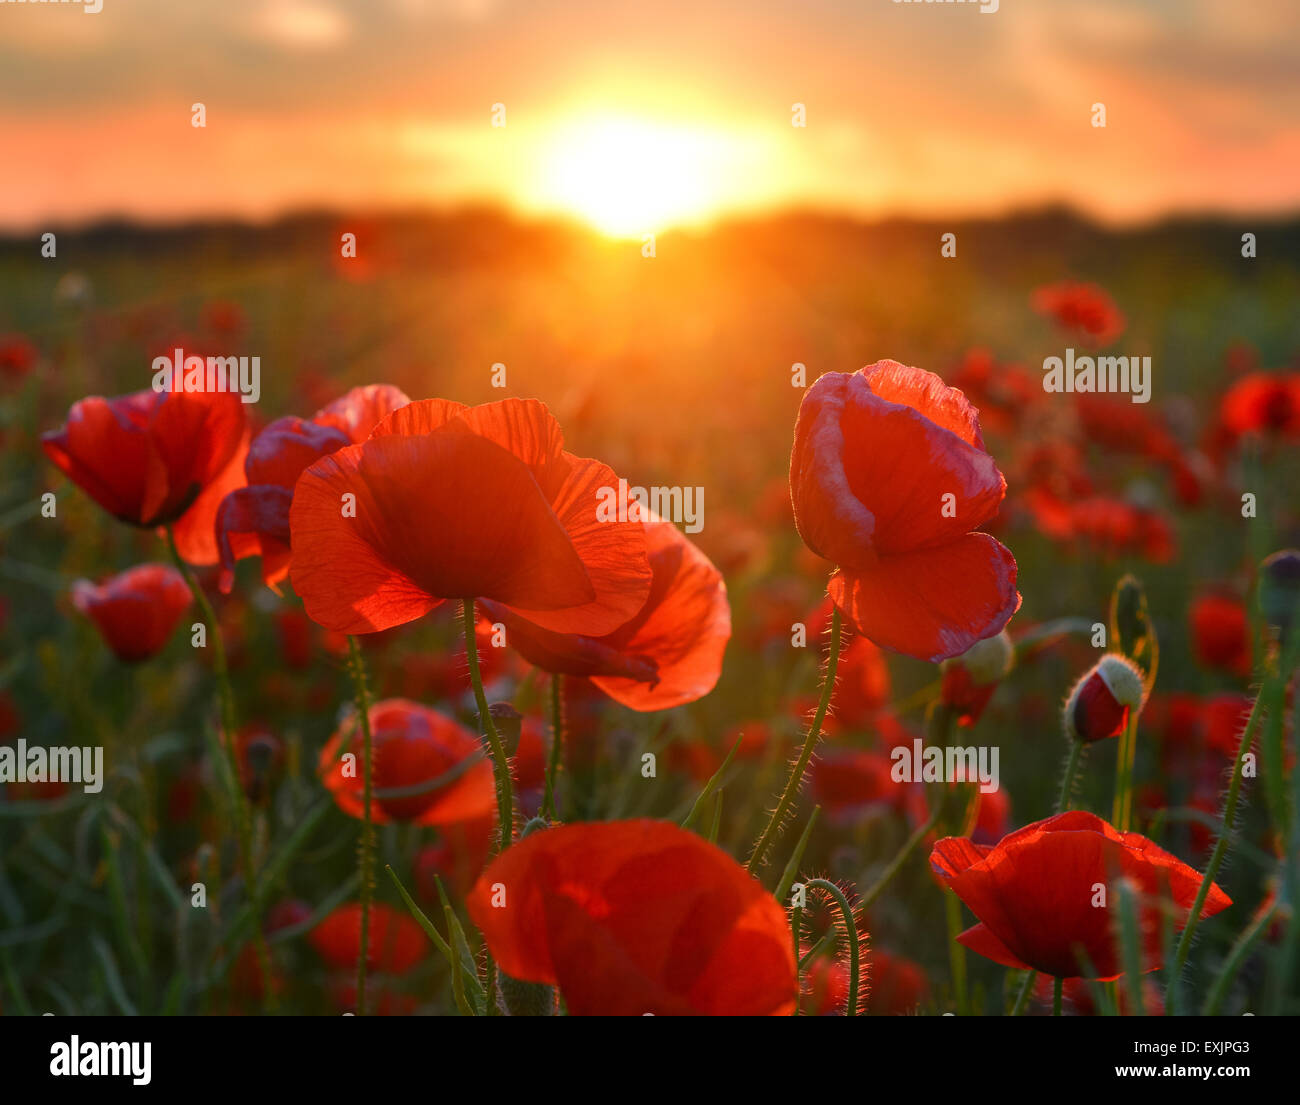 Field of red poppies in summer countryside at sunrise. Stock Photo